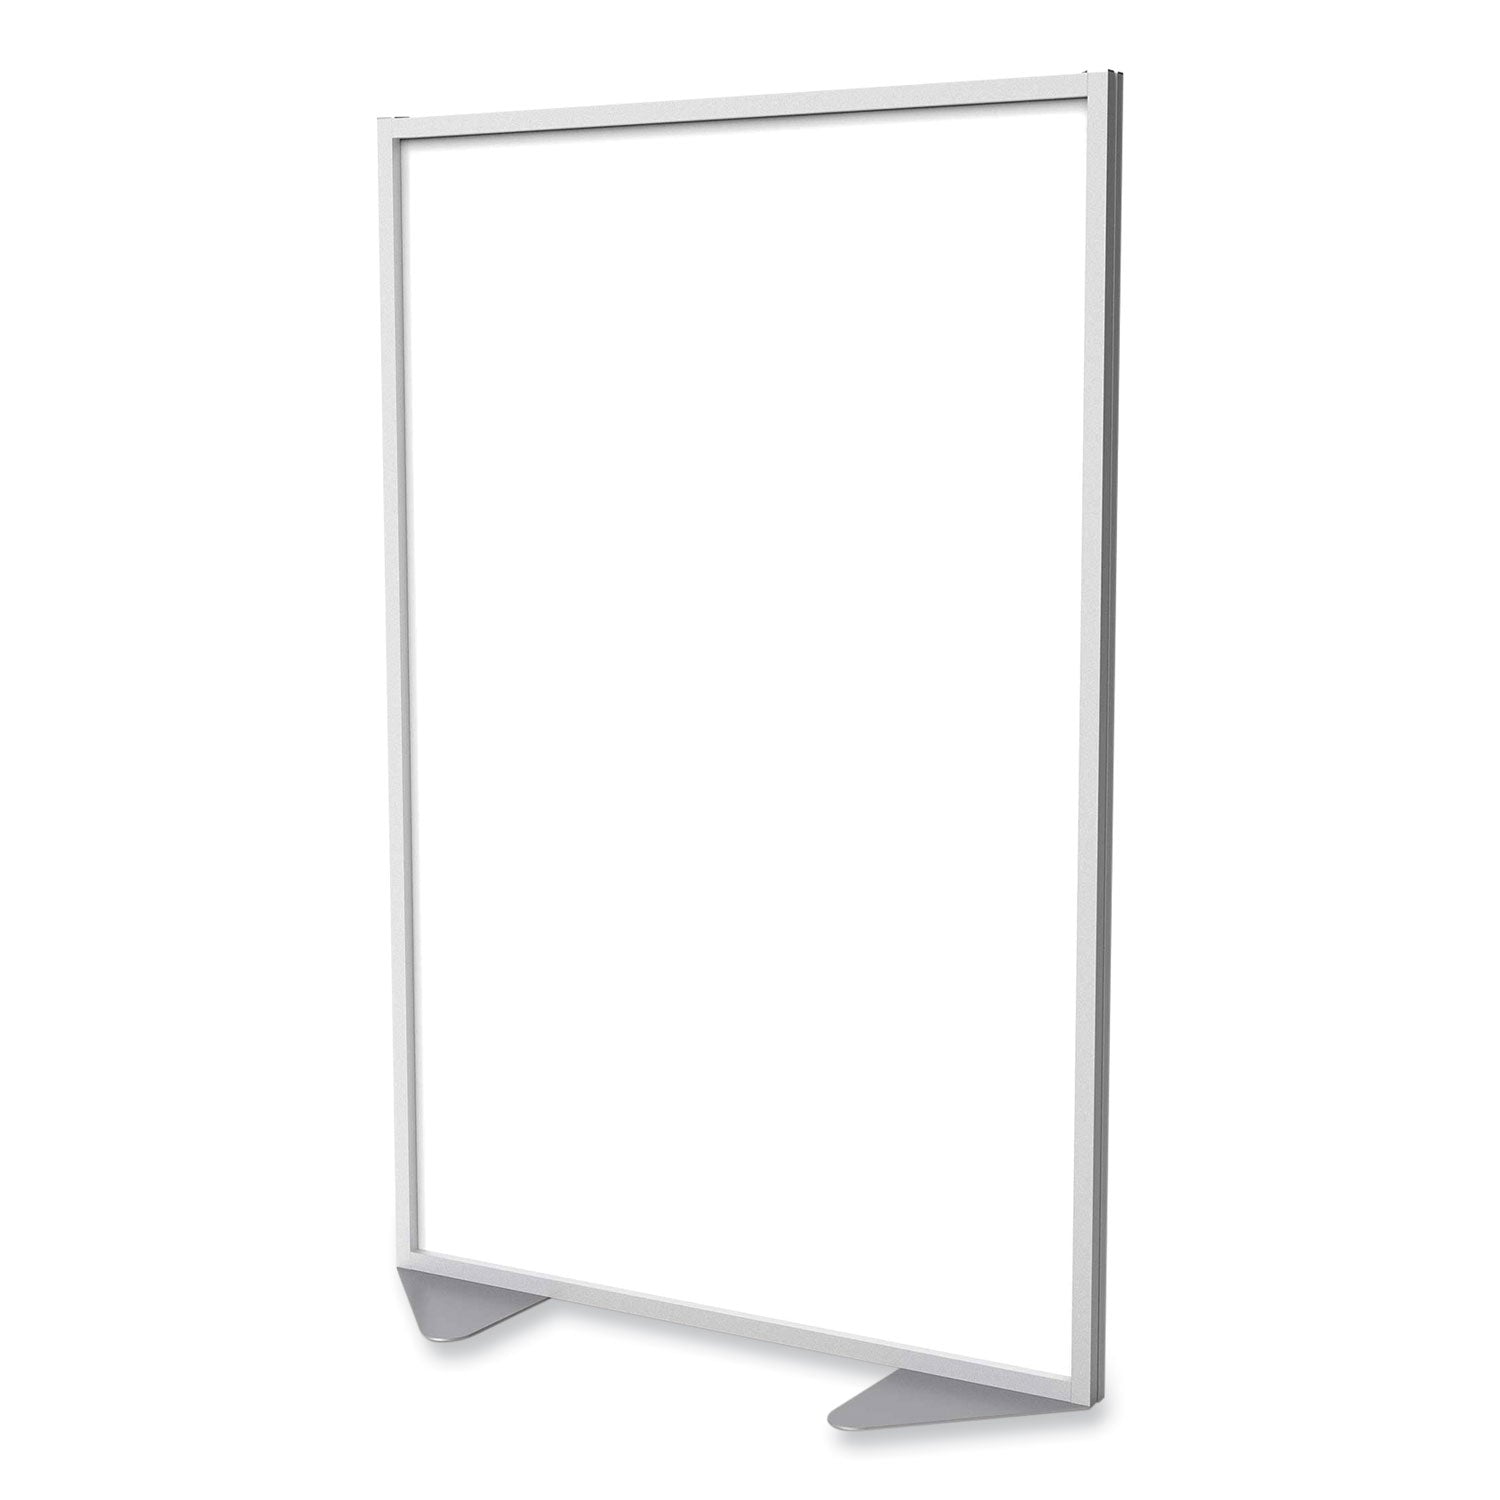 floor-partition-with-aluminum-frame-4806-x-204-x-7186-white-ships-in-7-10-business-days_ghemp724820 - 1